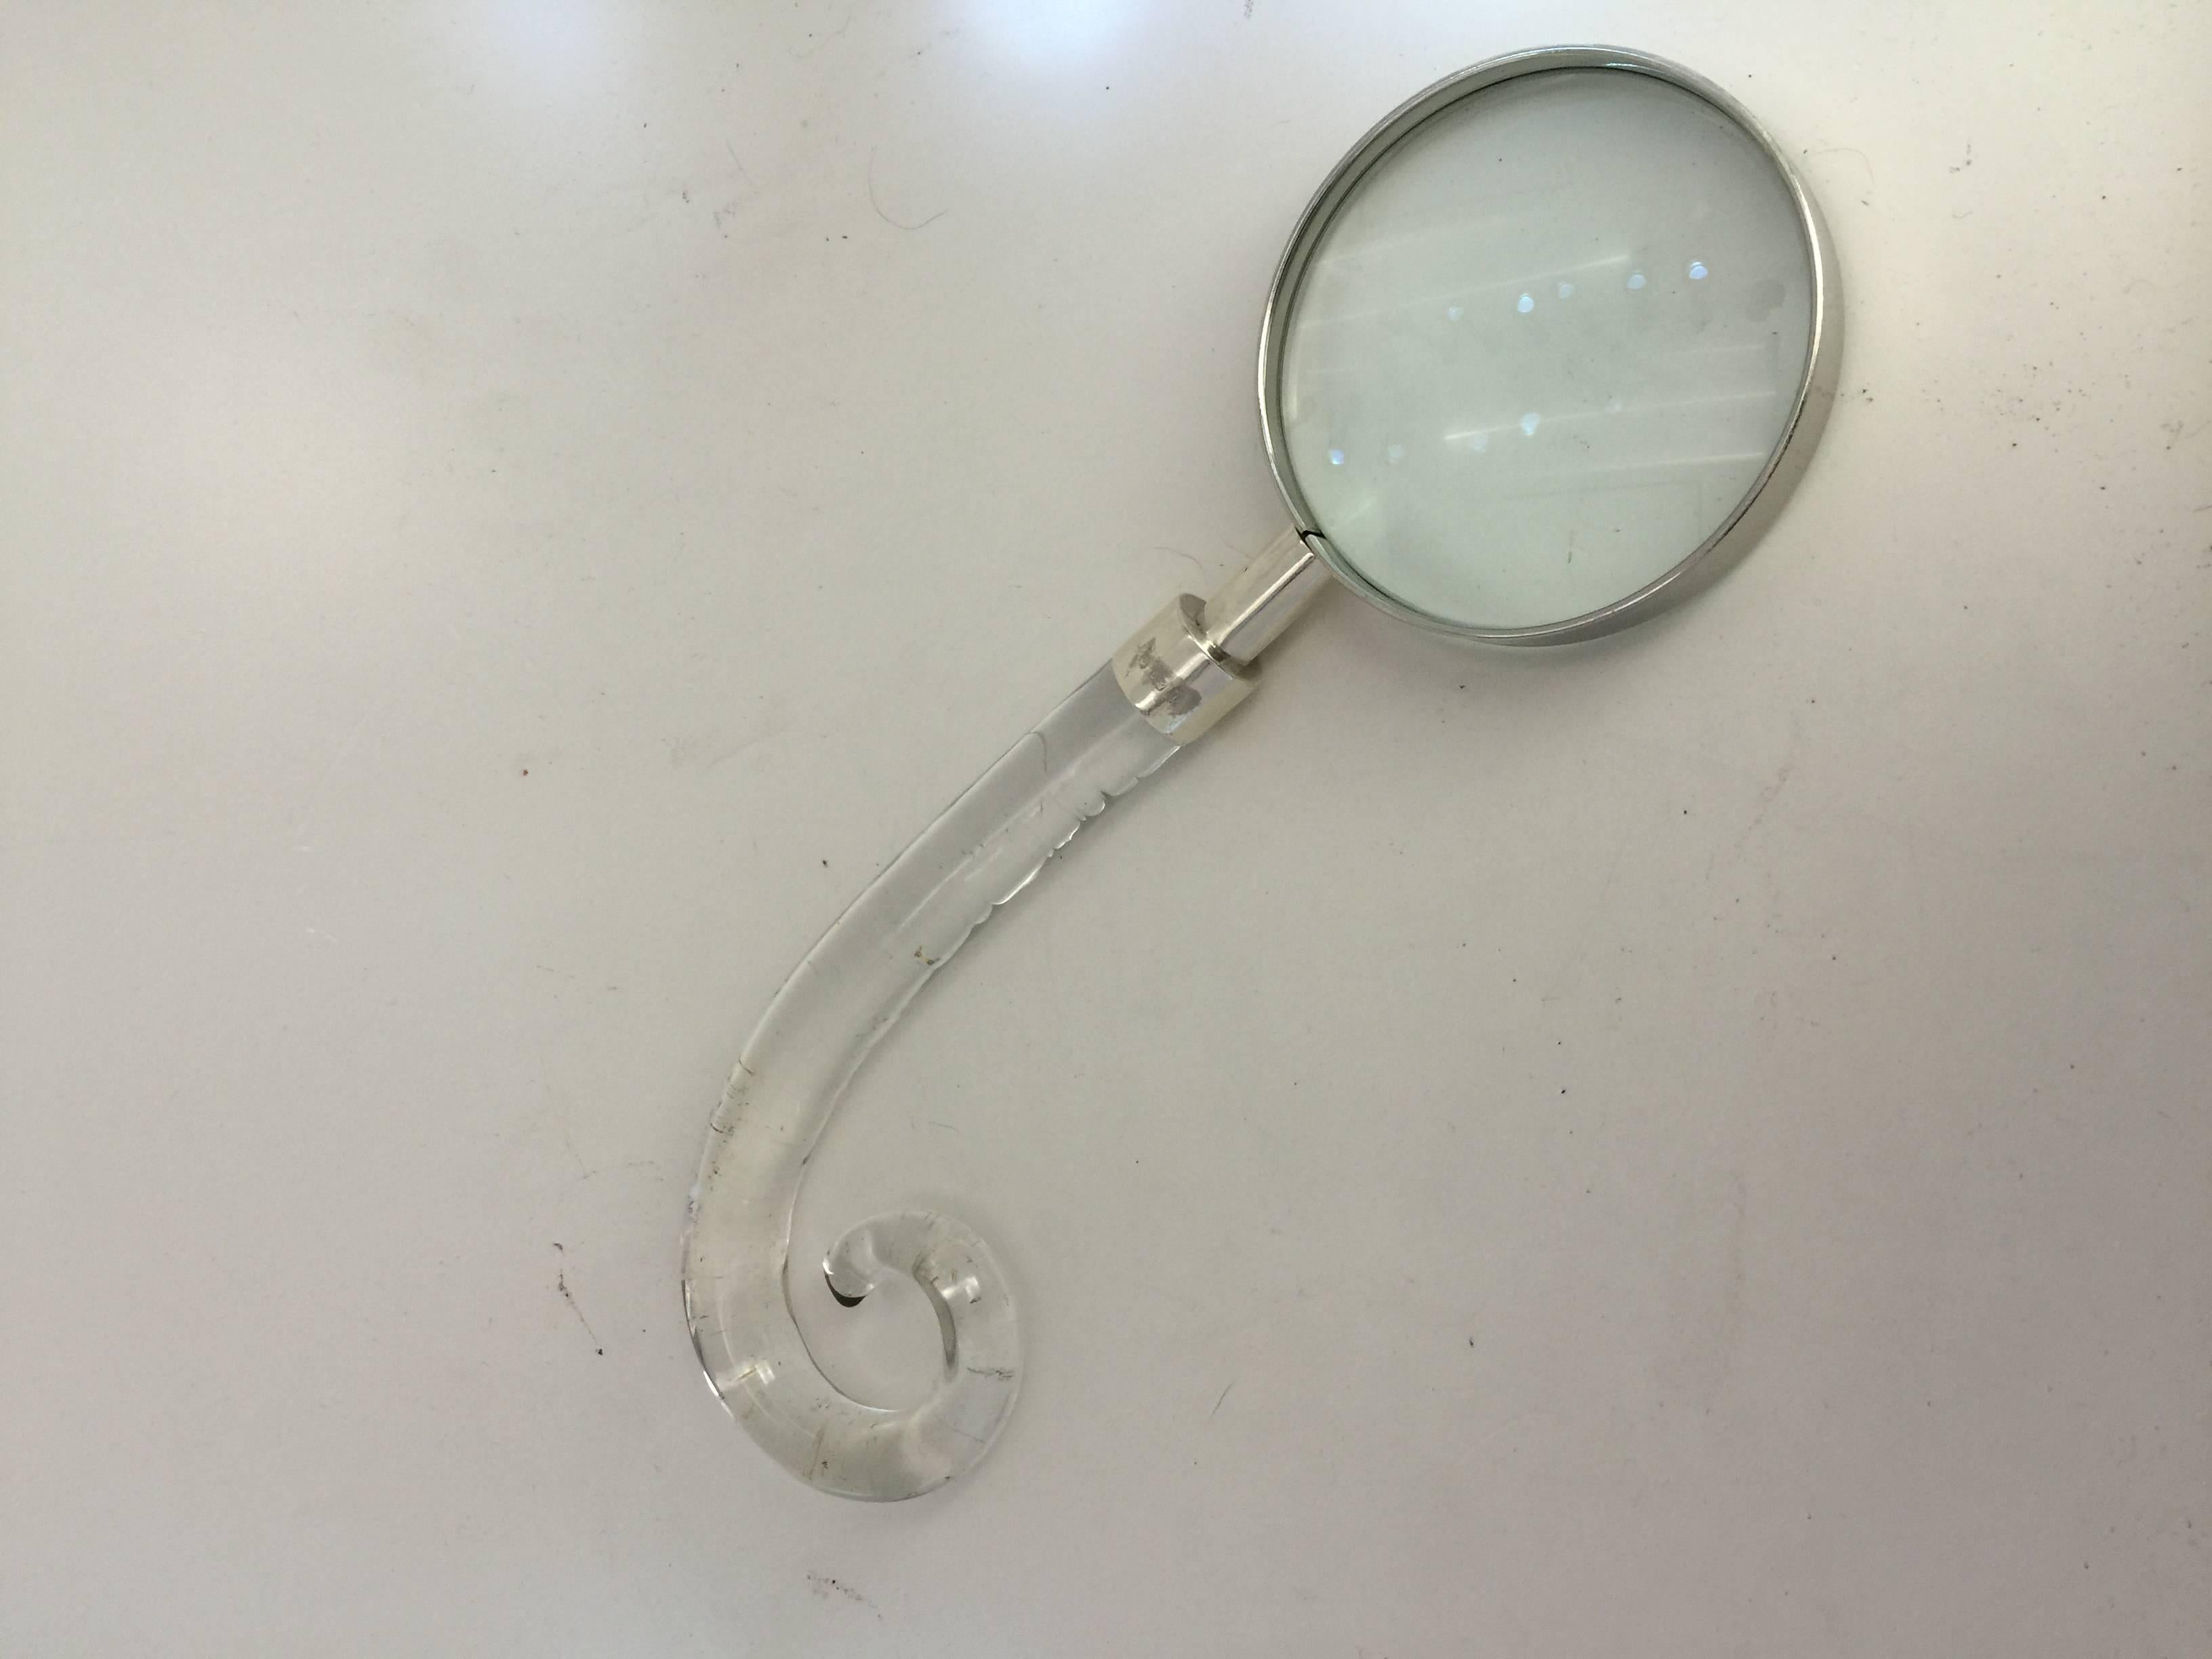 The curling glass handle with silver mount connecting to magnifying glass.